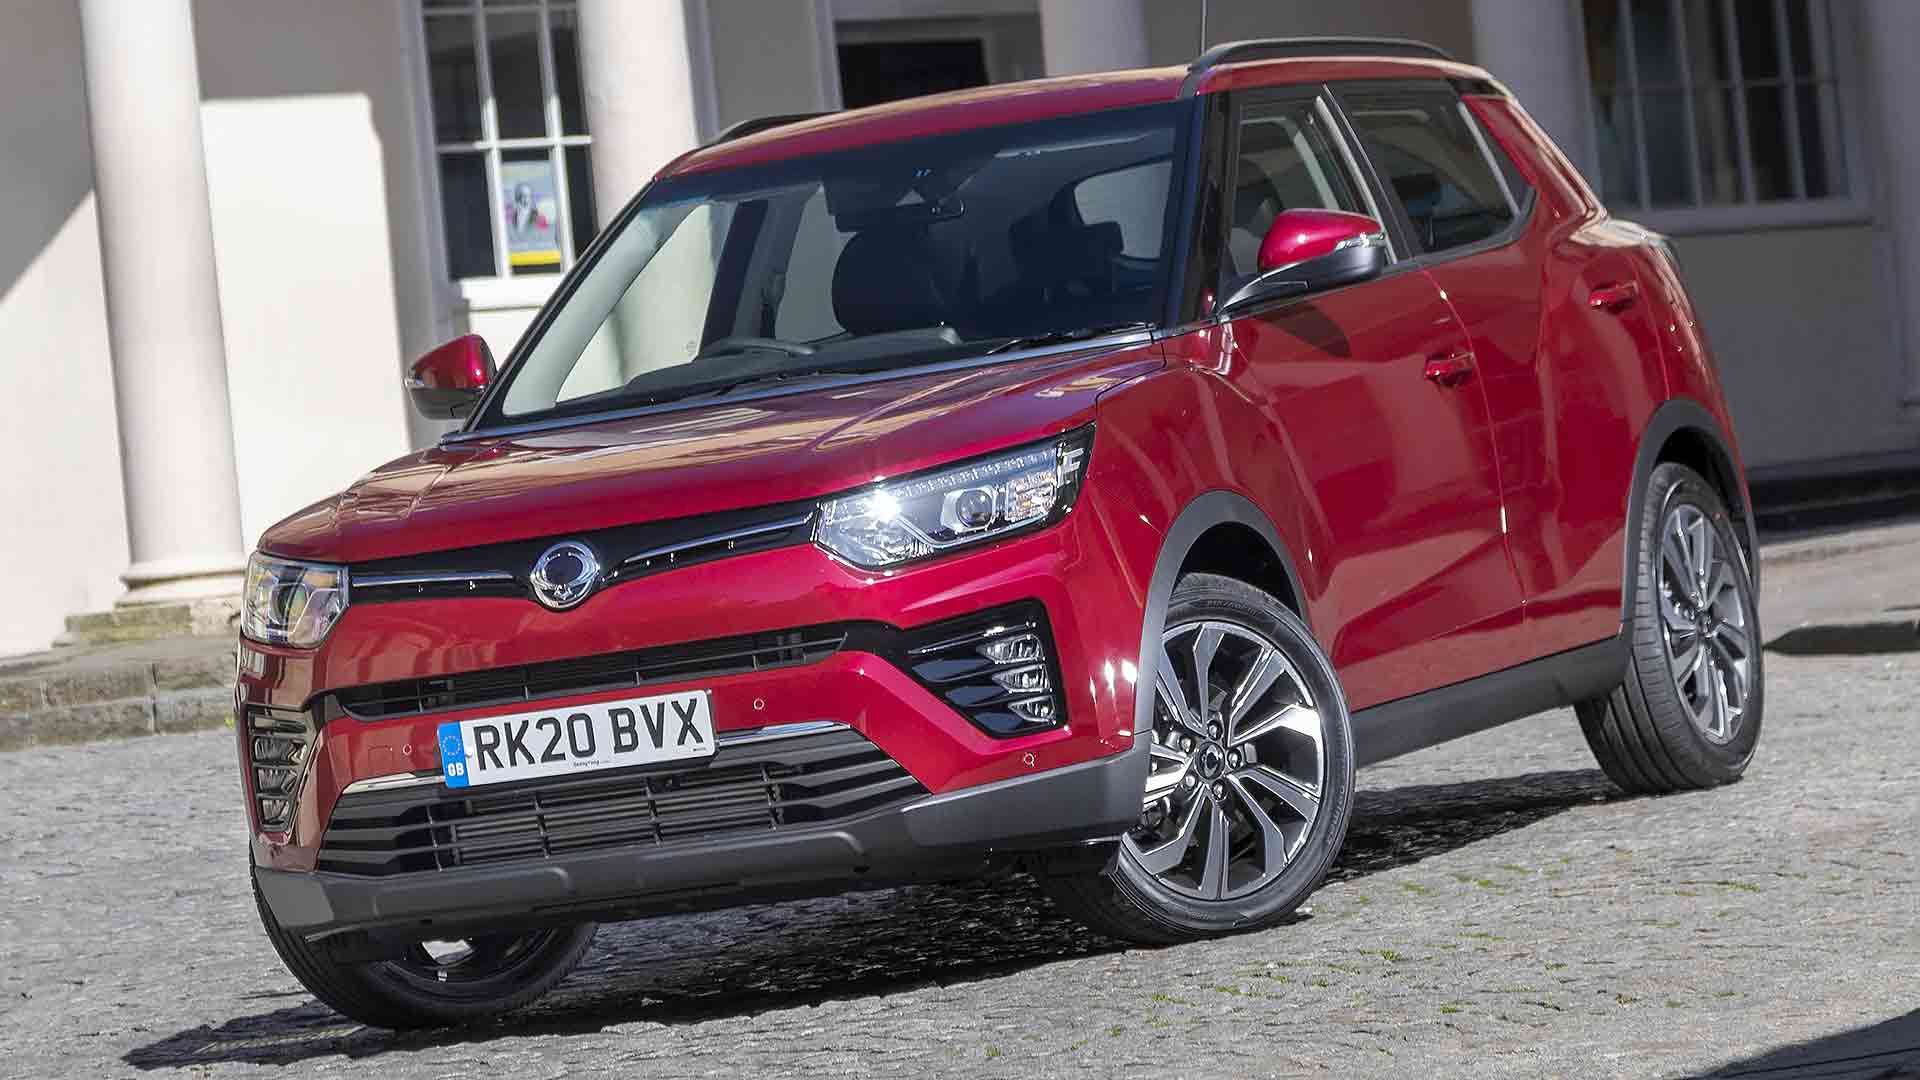 2020 SsangYong Tivoli update: prices, specs and release date - Motoring ...